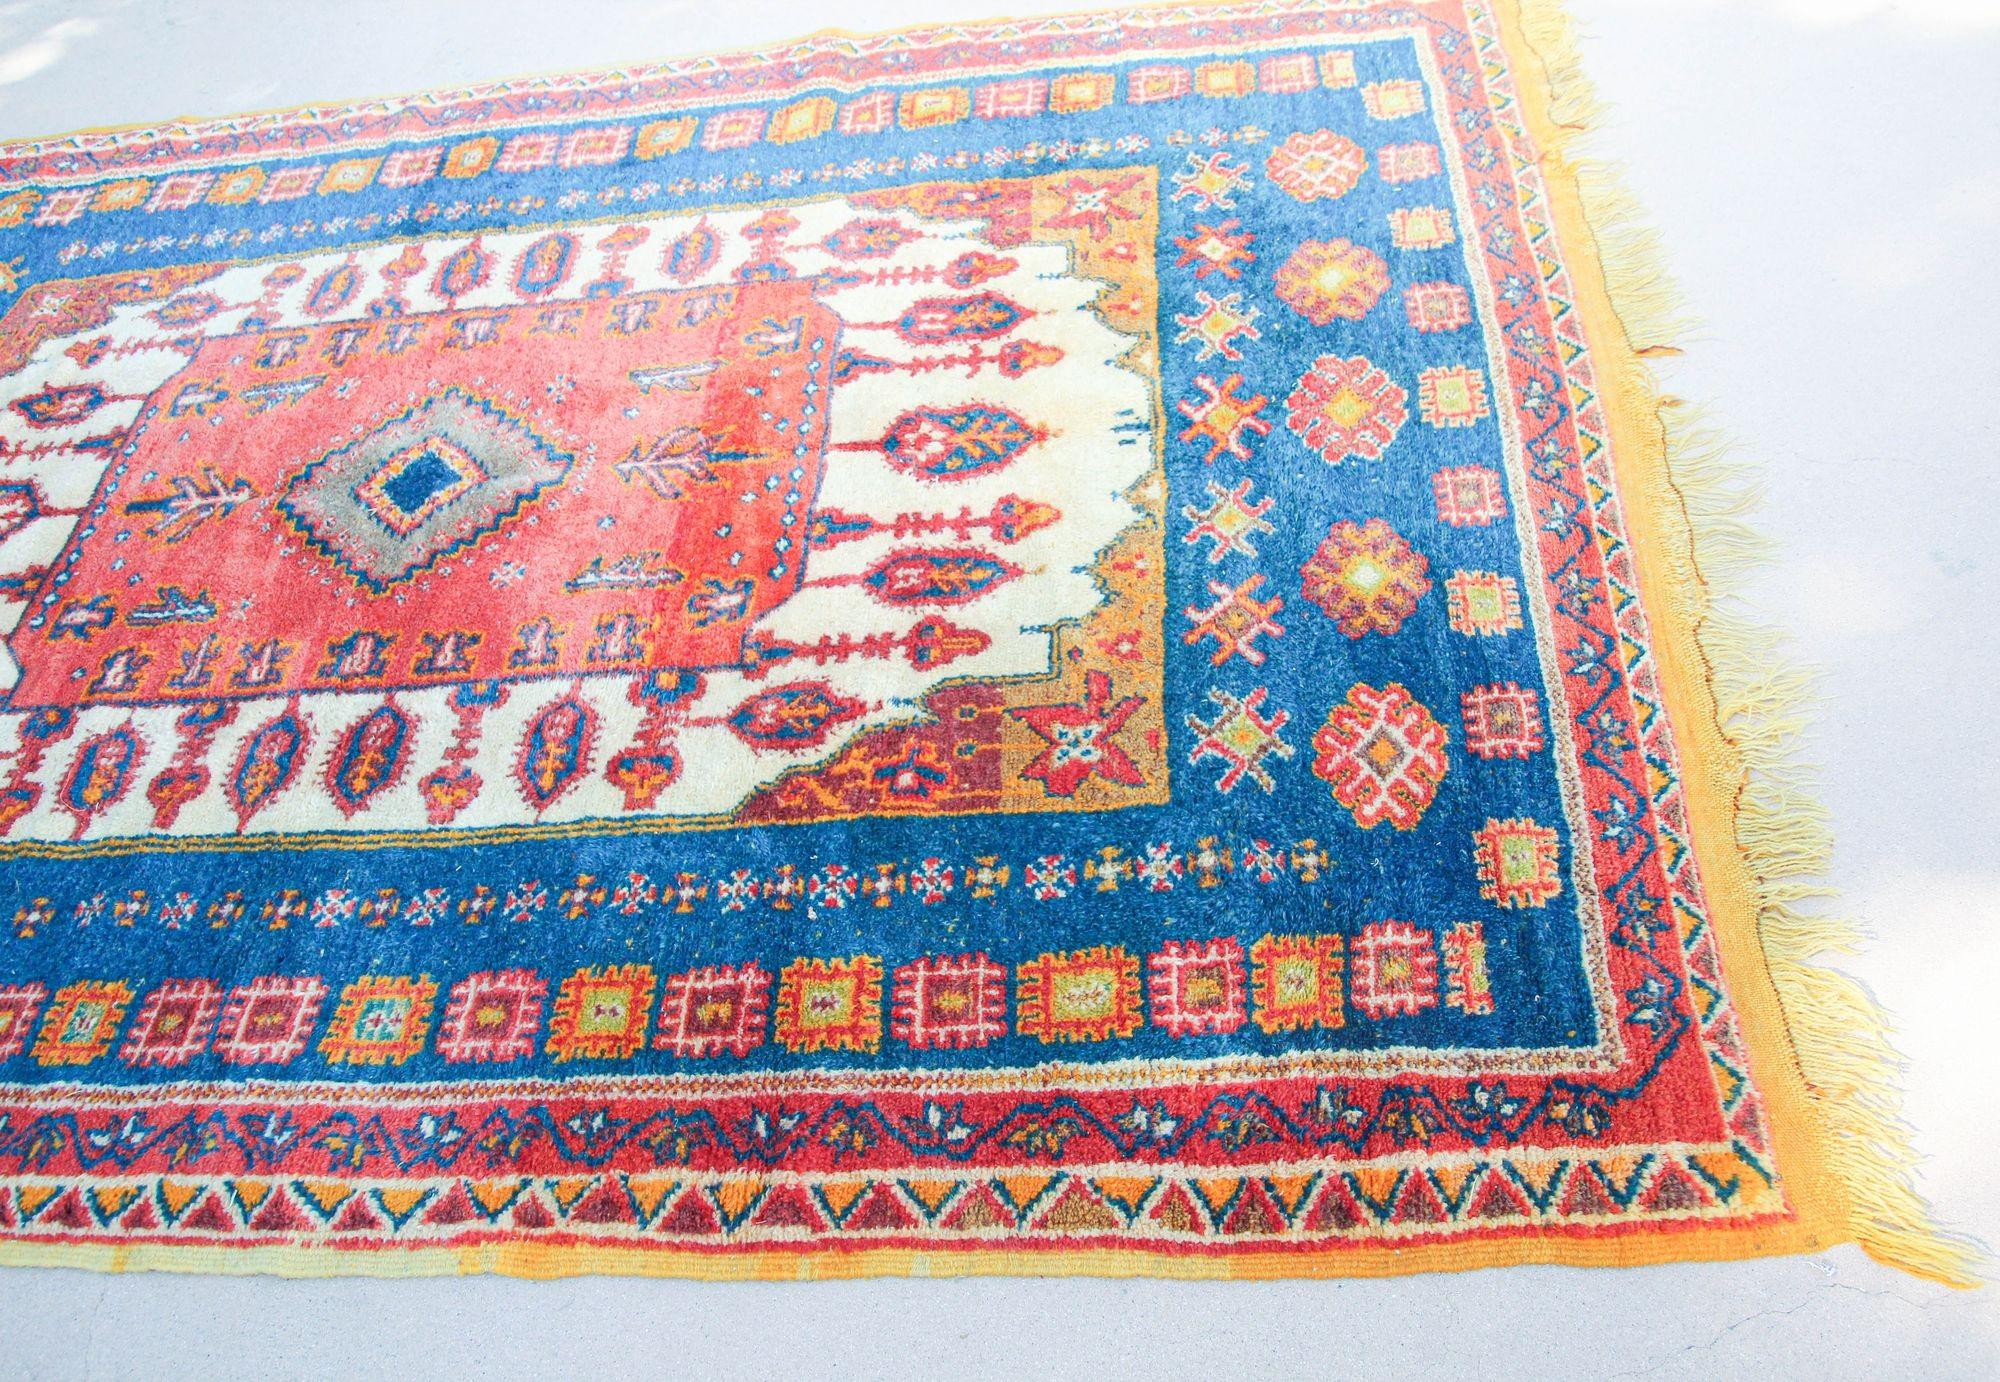 1960s Moroccan Berber Rug in Royal Blue, Pink and Orange Colors For Sale 4